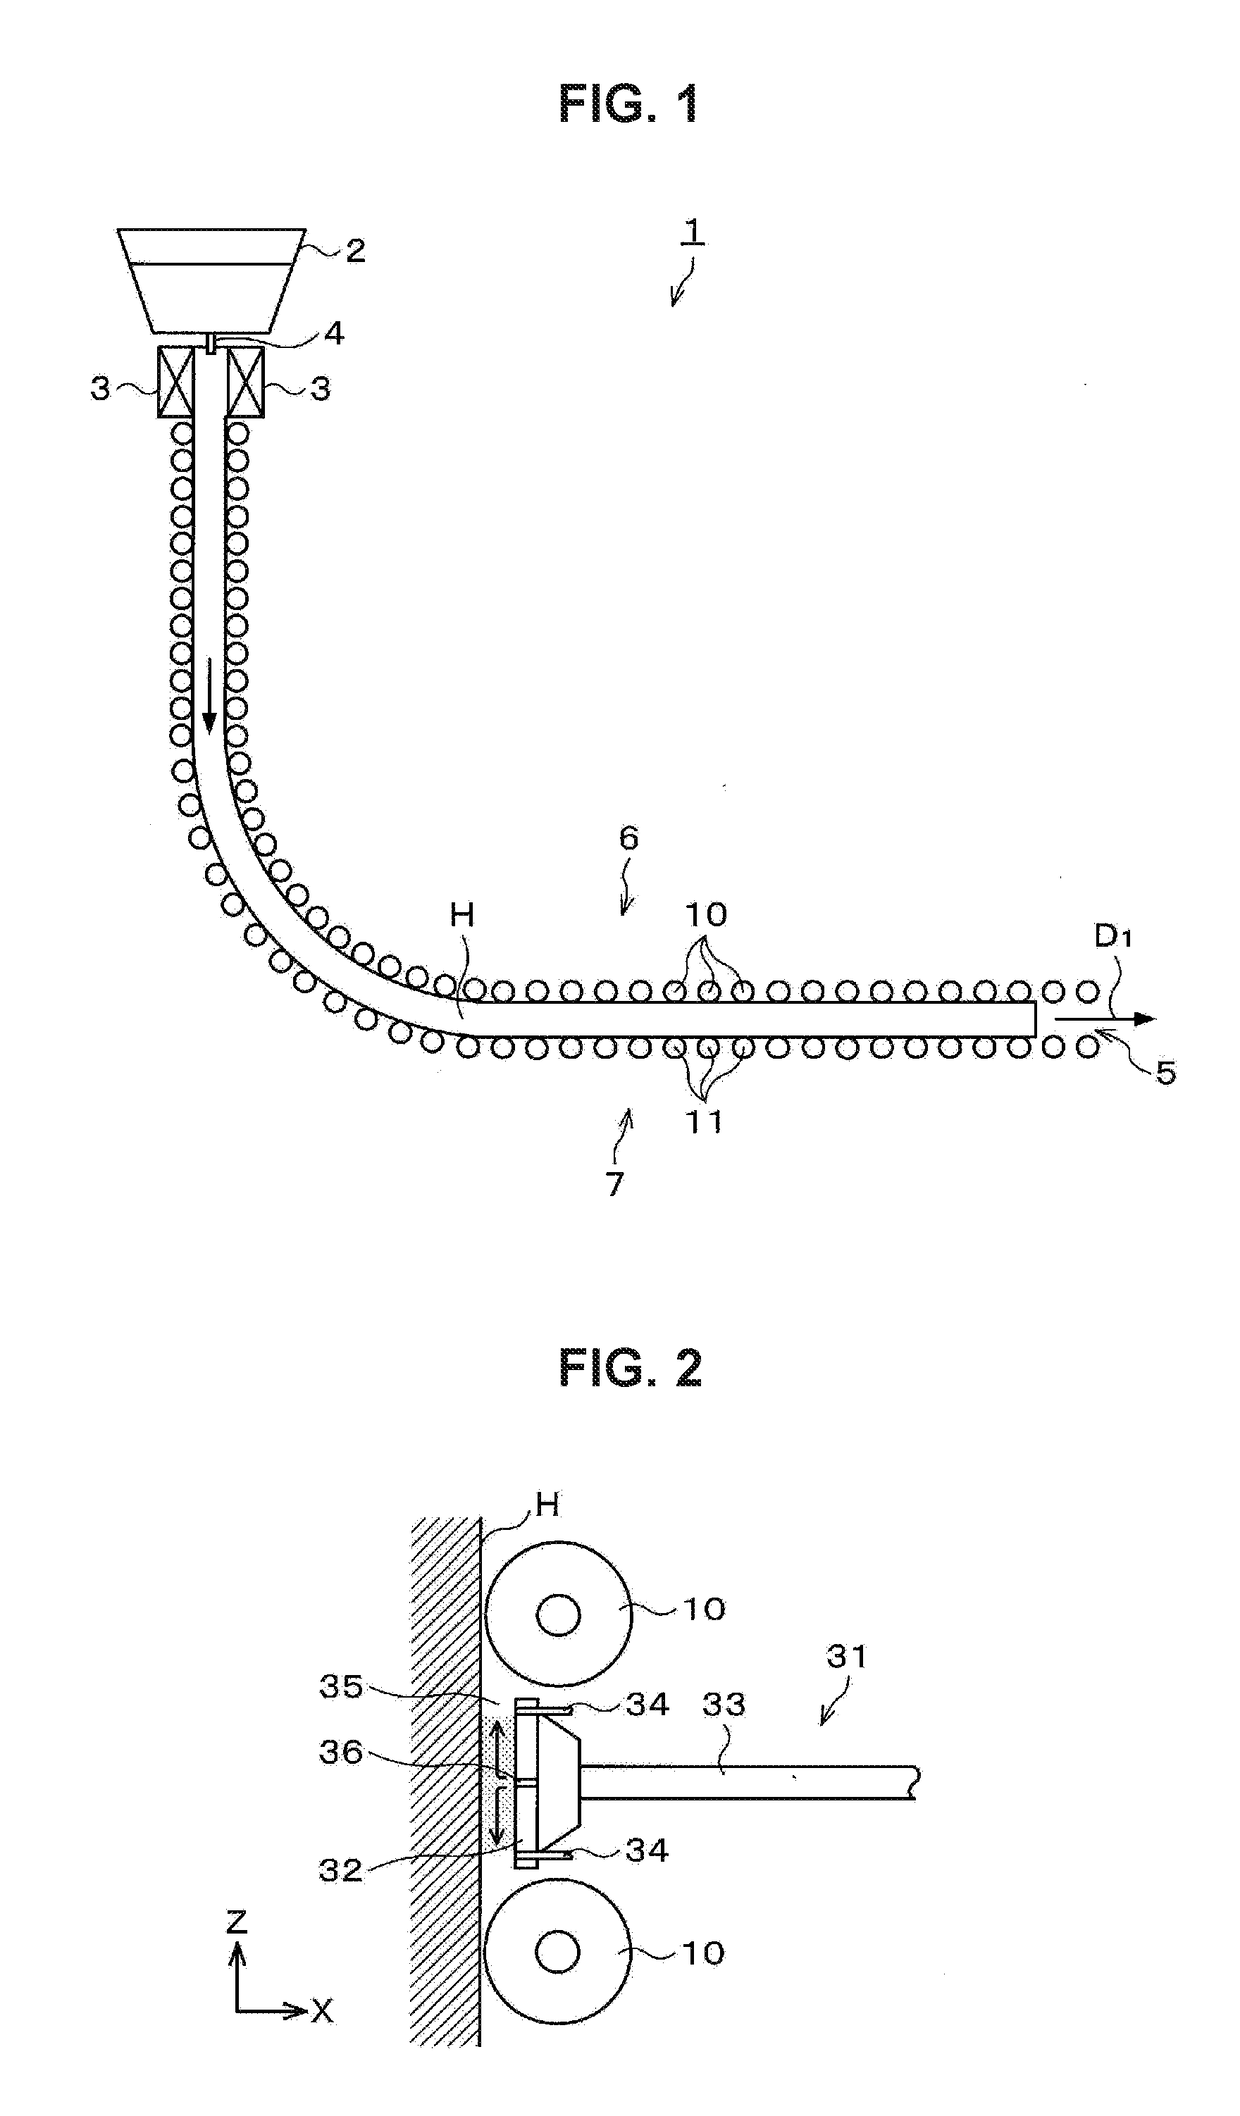 Secondary cooling method and secondary cooling device for casting product in continuous casting